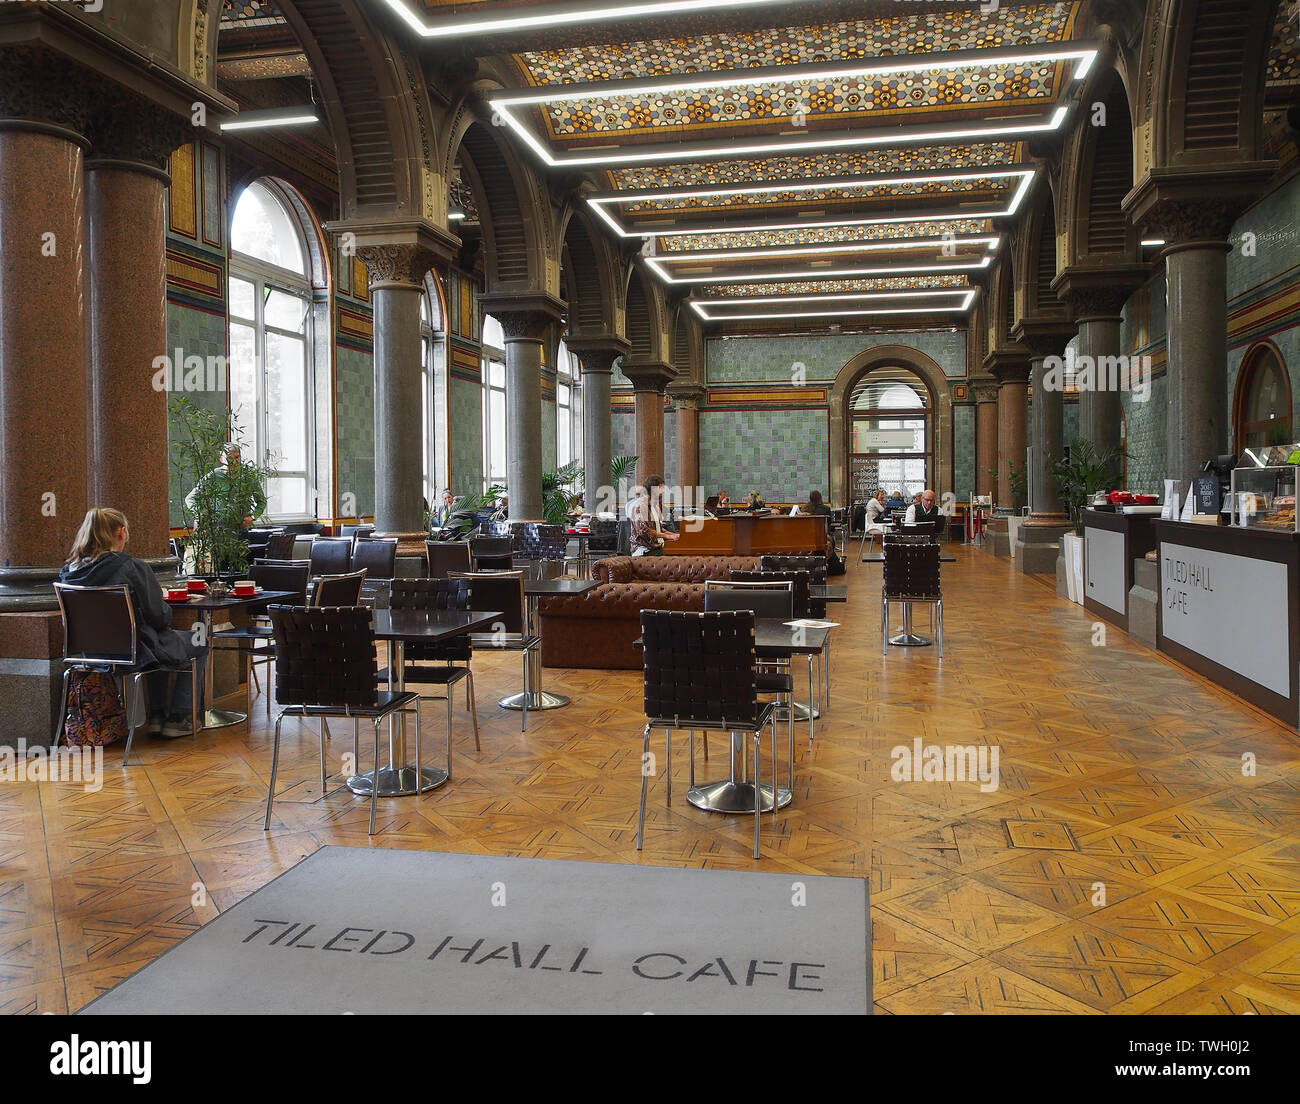 The Tiled Hall Cafe in Leeds Art Gallery, Yorkshire, England, UK. Stock Photo